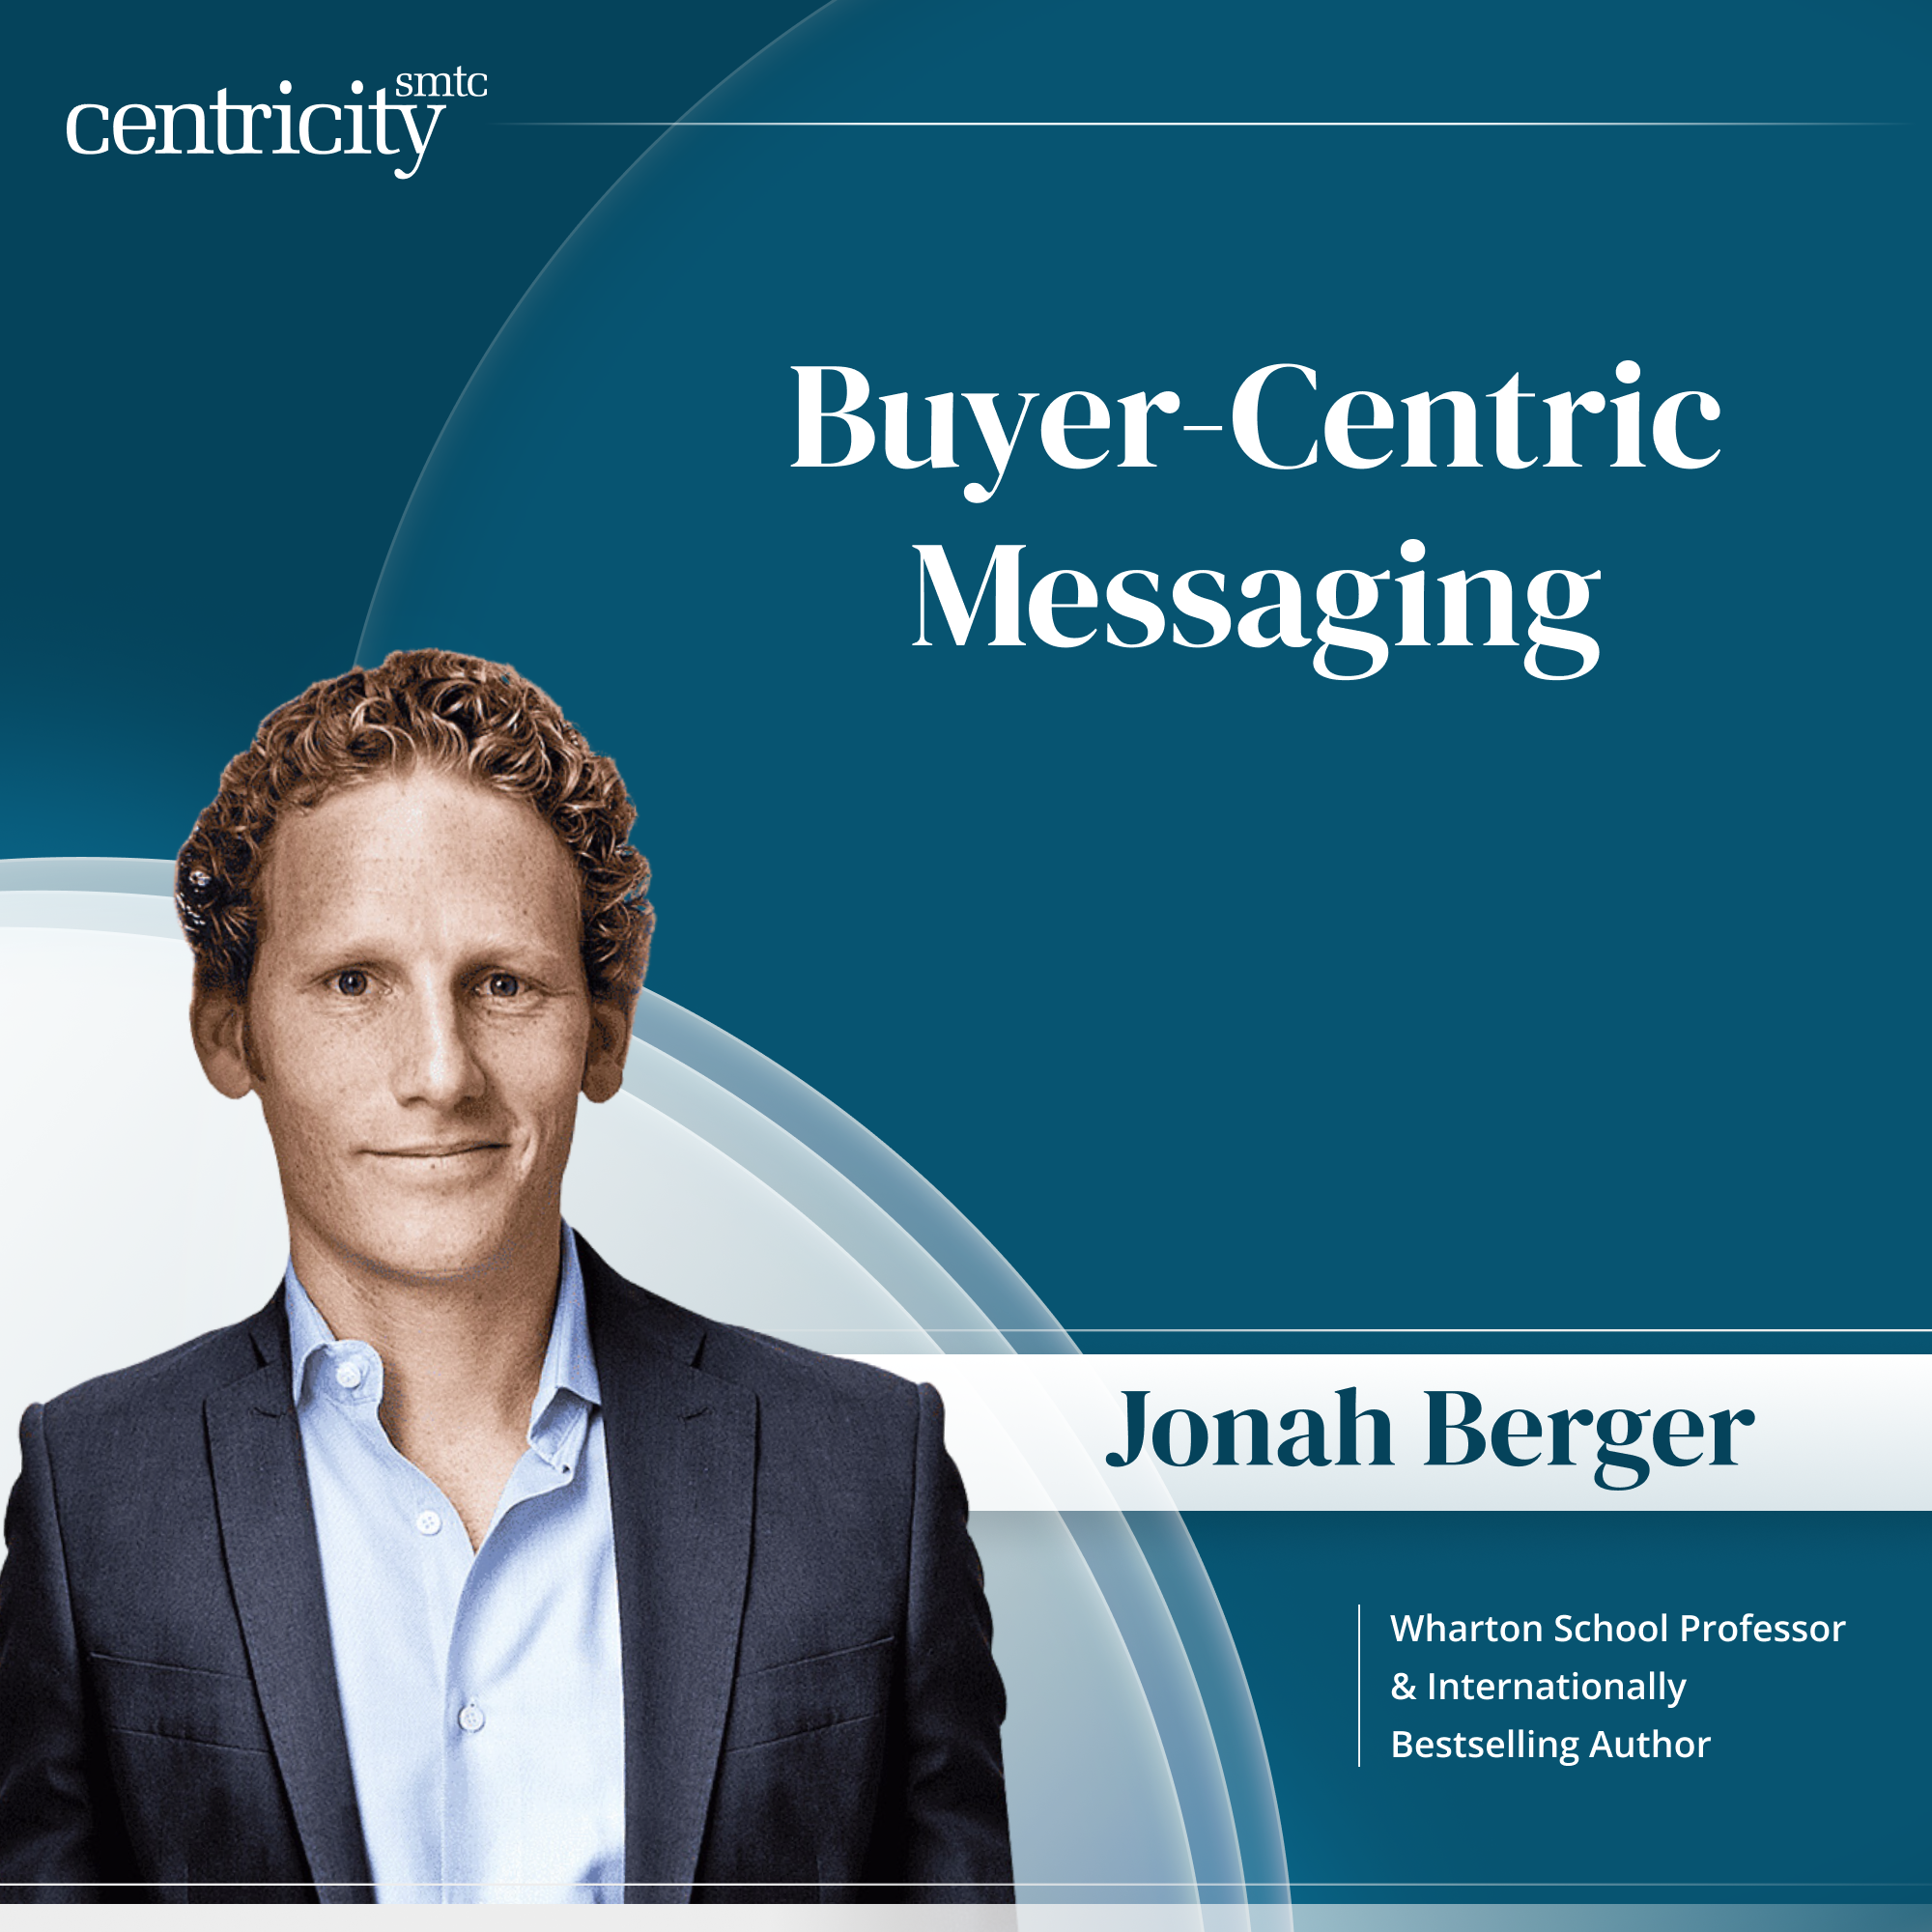 How to Engage More Effectively With Buyers